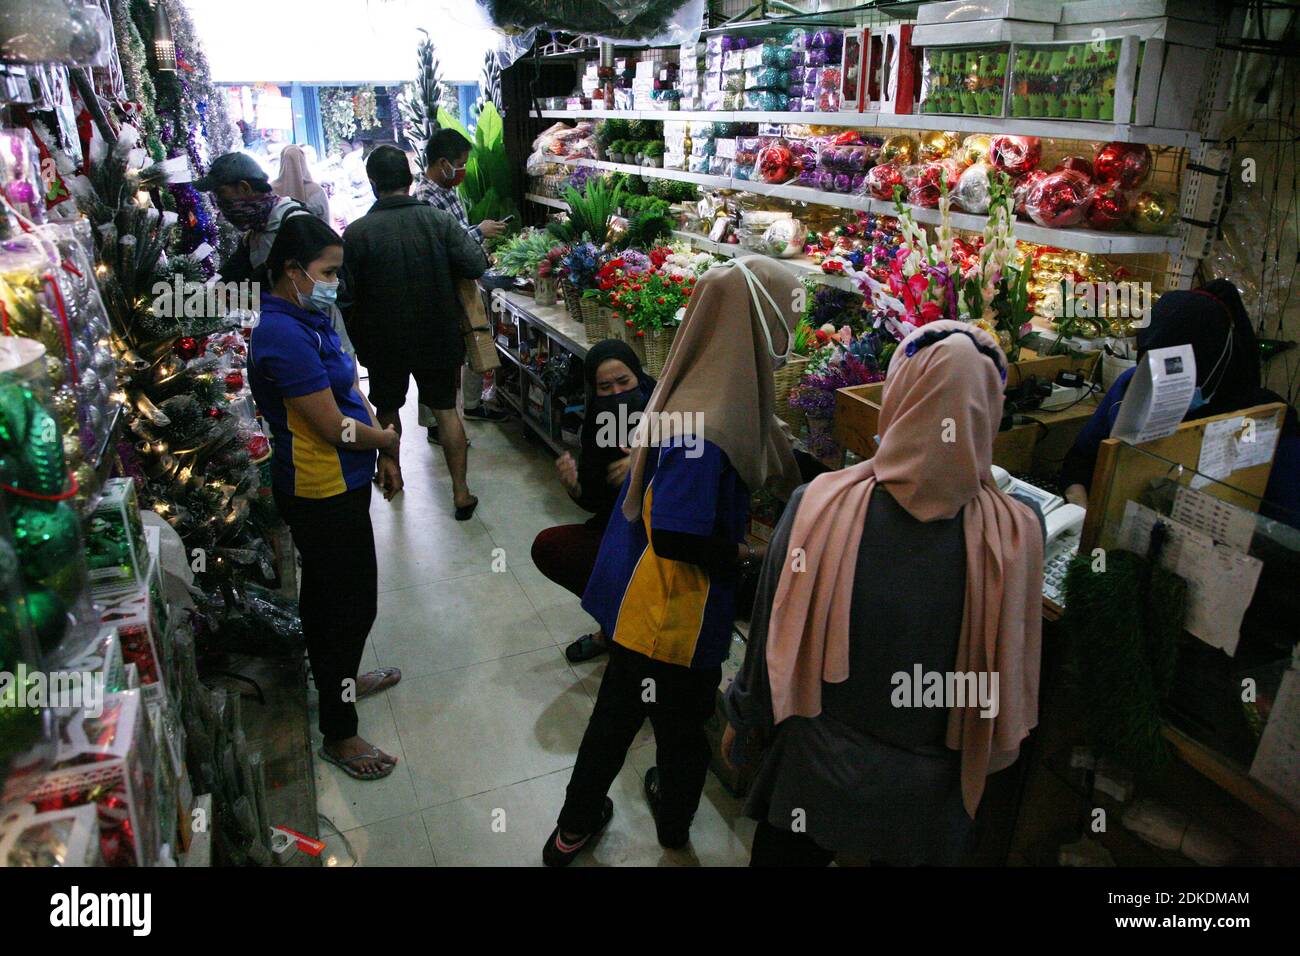 Jakarta, Indonesia. 15th Dec, 2020. A shops selling decorations ...